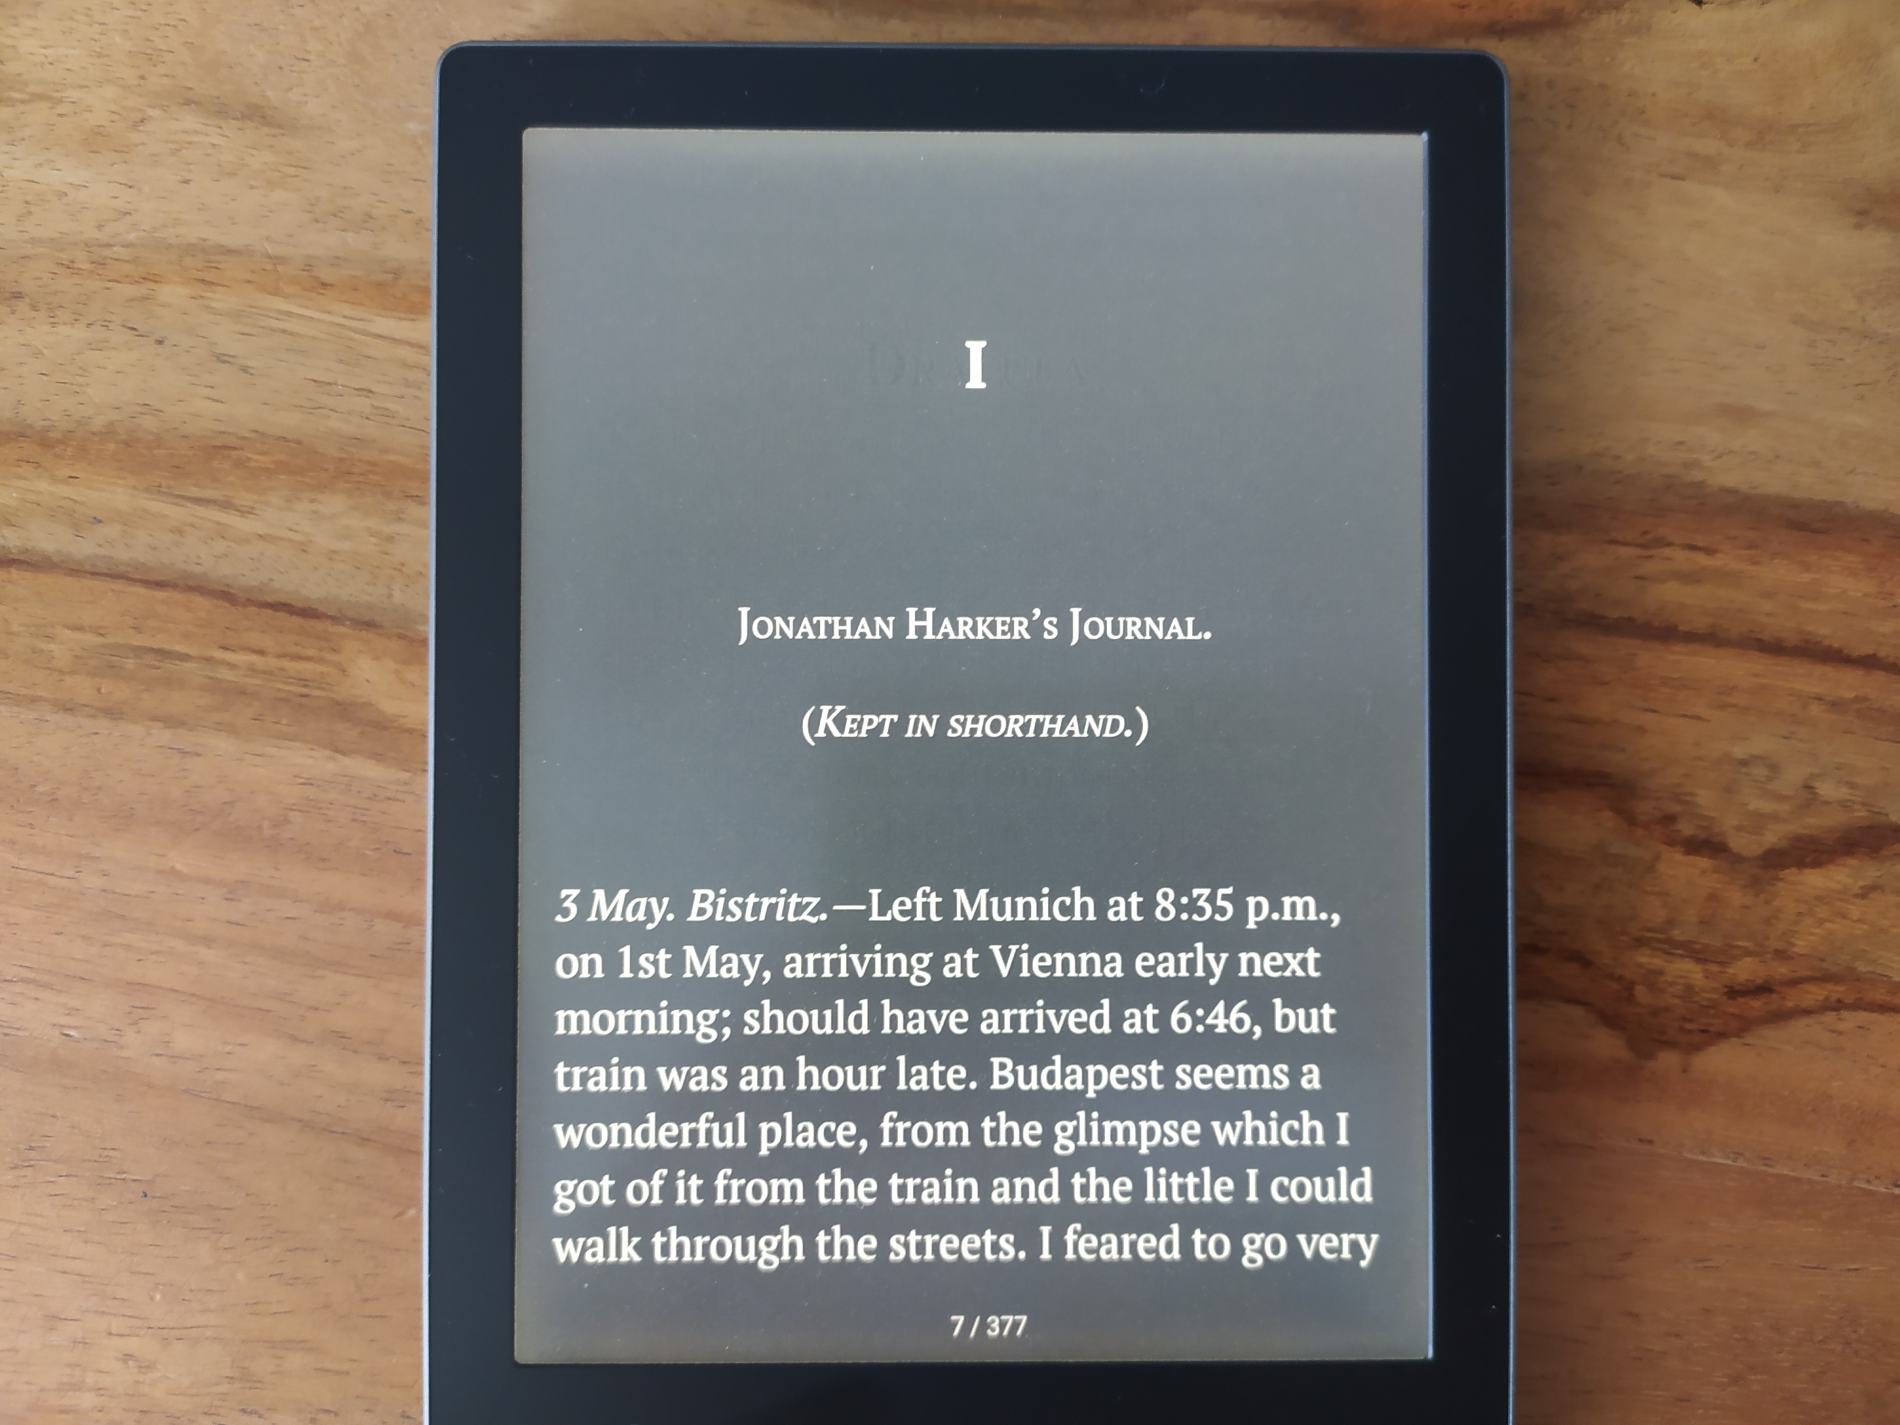 How to configure your e-reader for optimal reading?